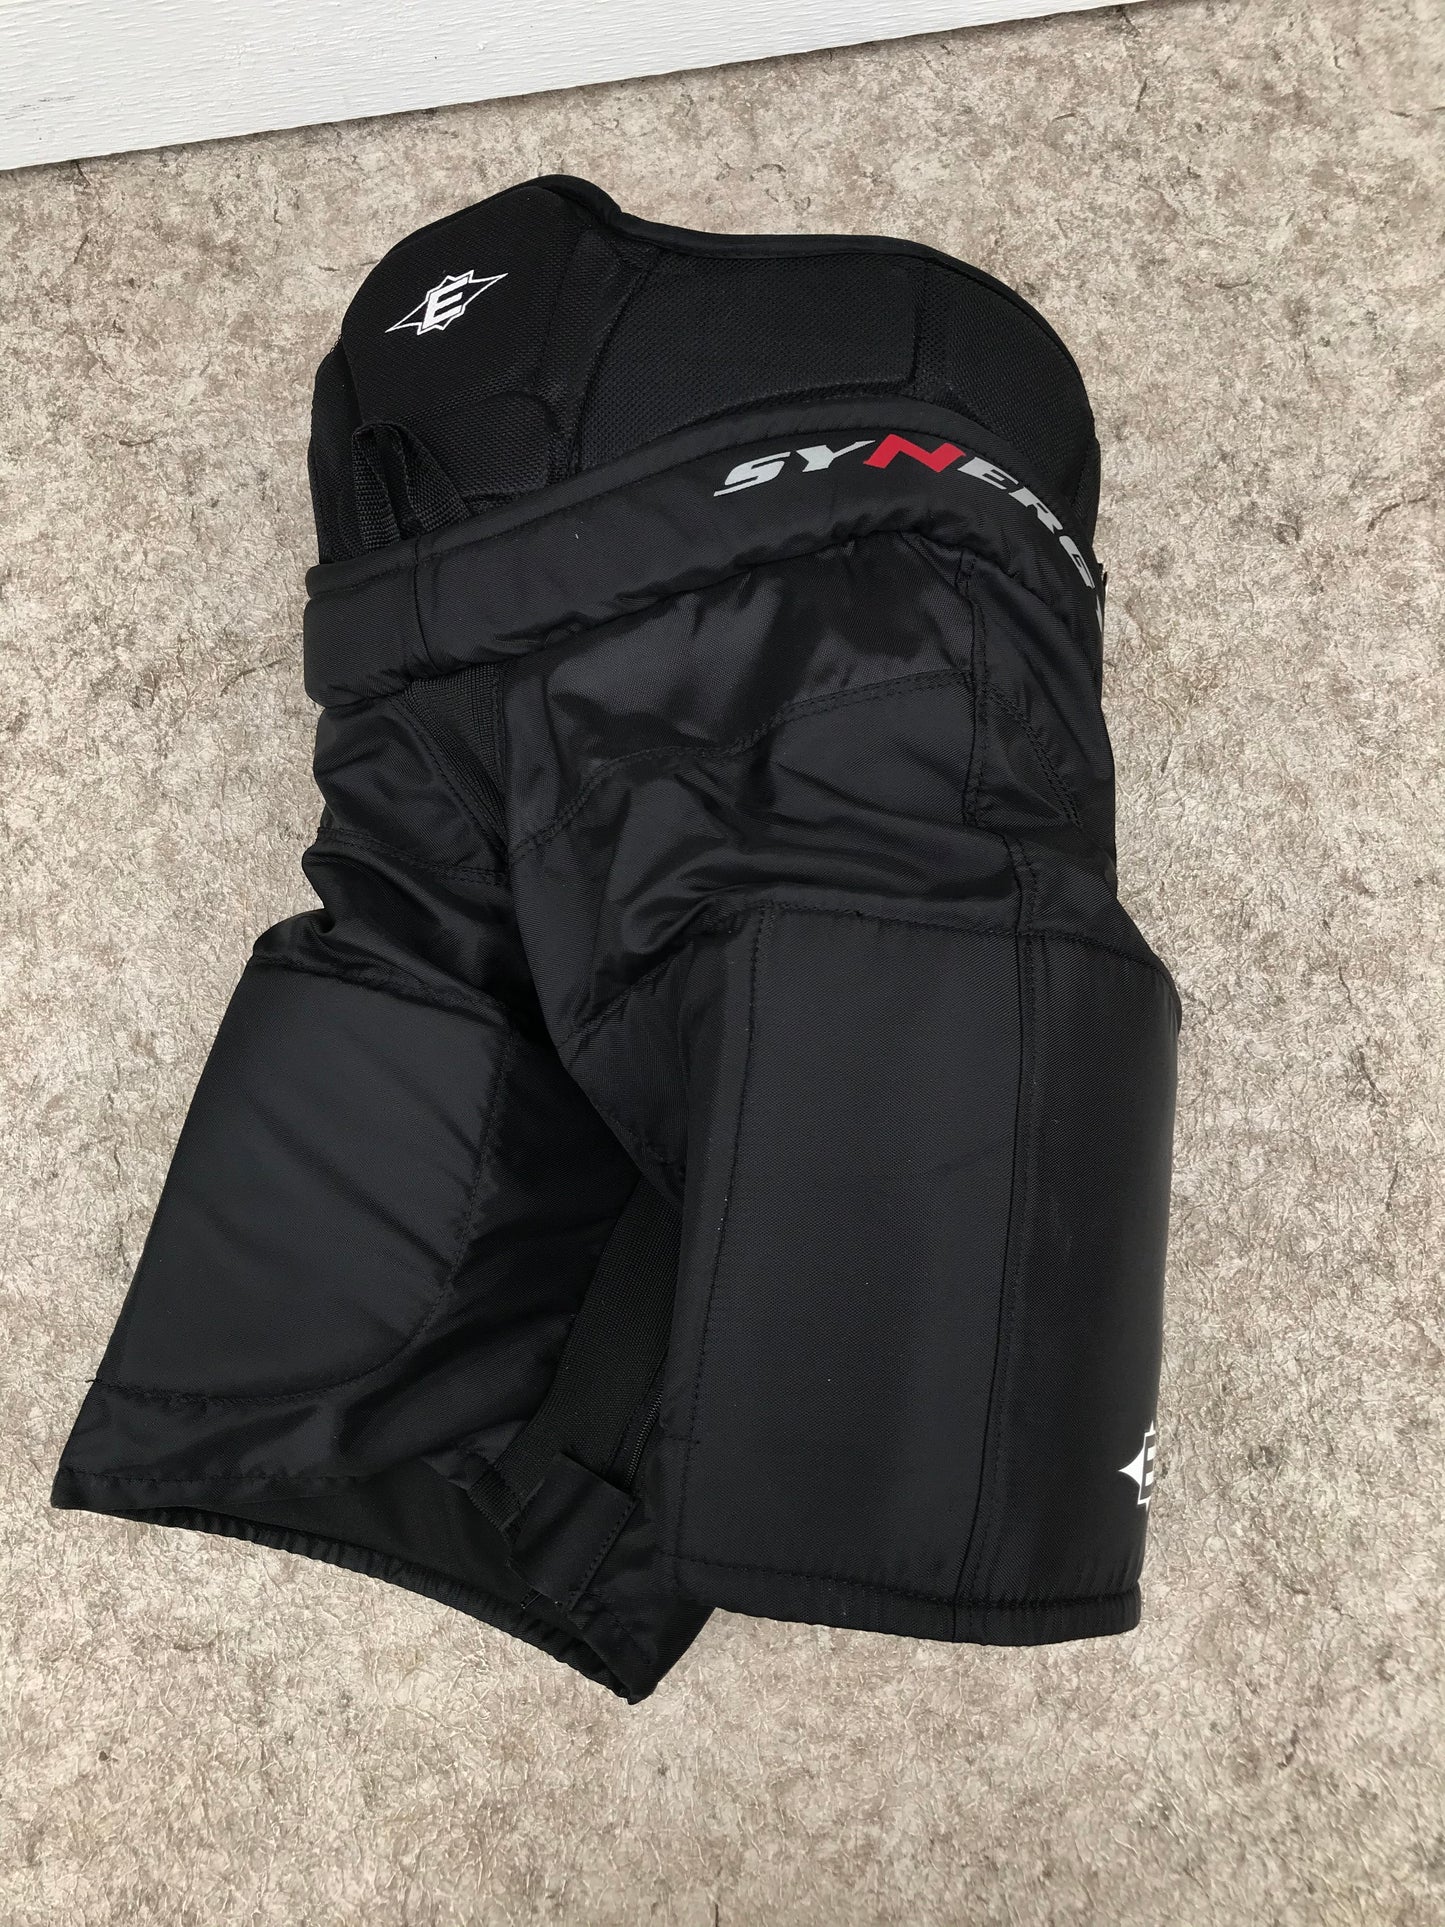 Hockey Pants Child Size Junior X Large Easton Synergy Excellent As New